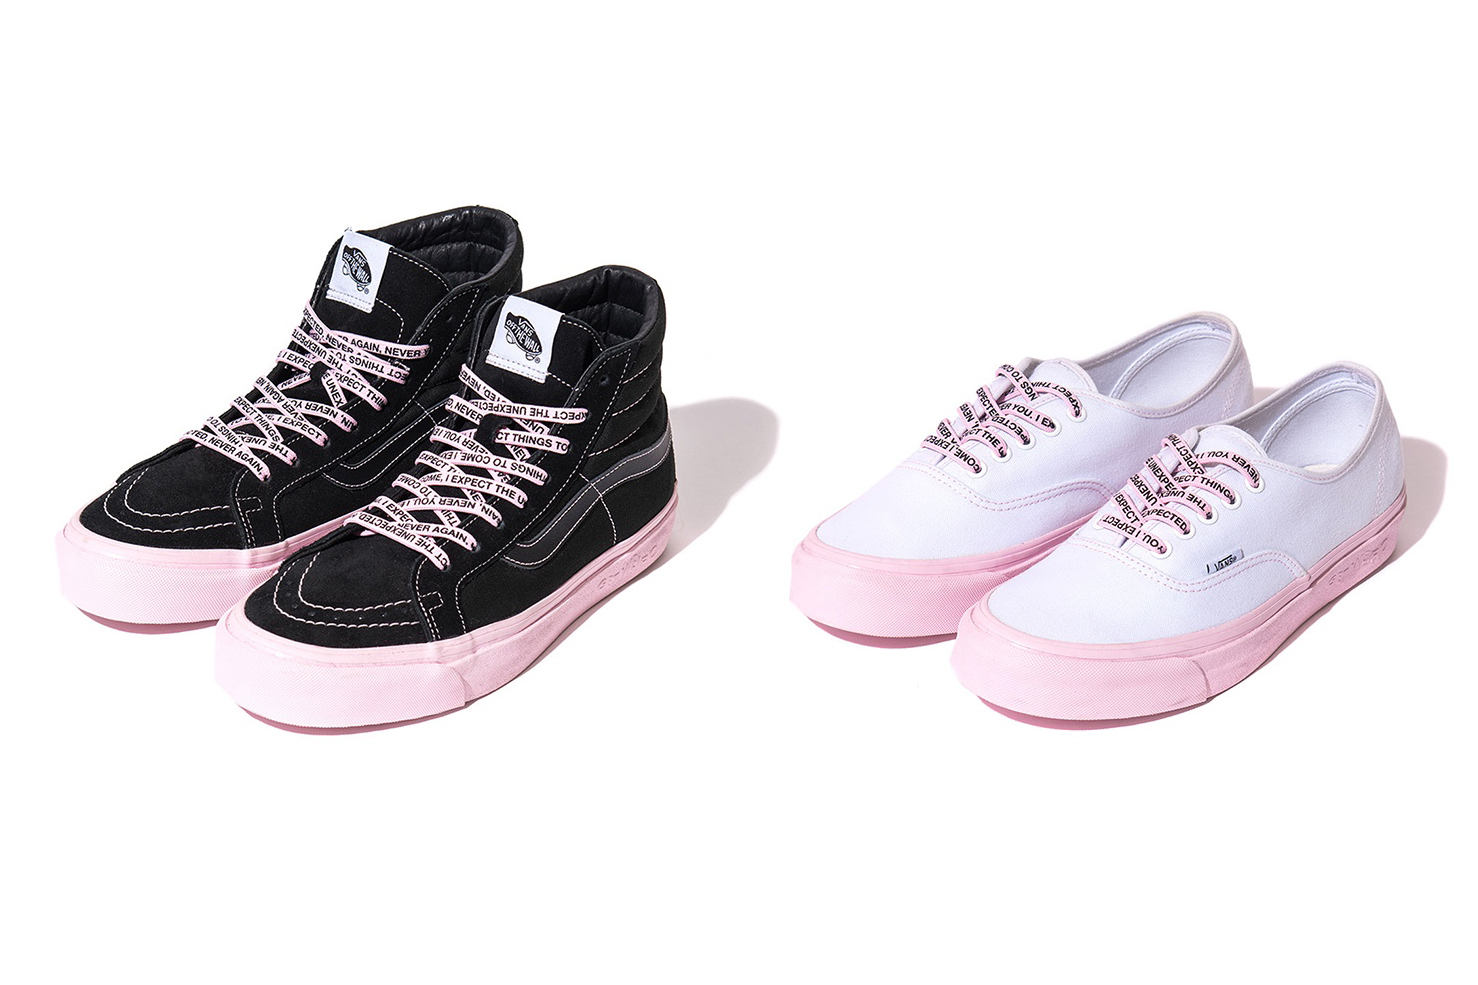 The Anti Social Social Club x Vans x Dover Street Market Sneakers Are Finally Here